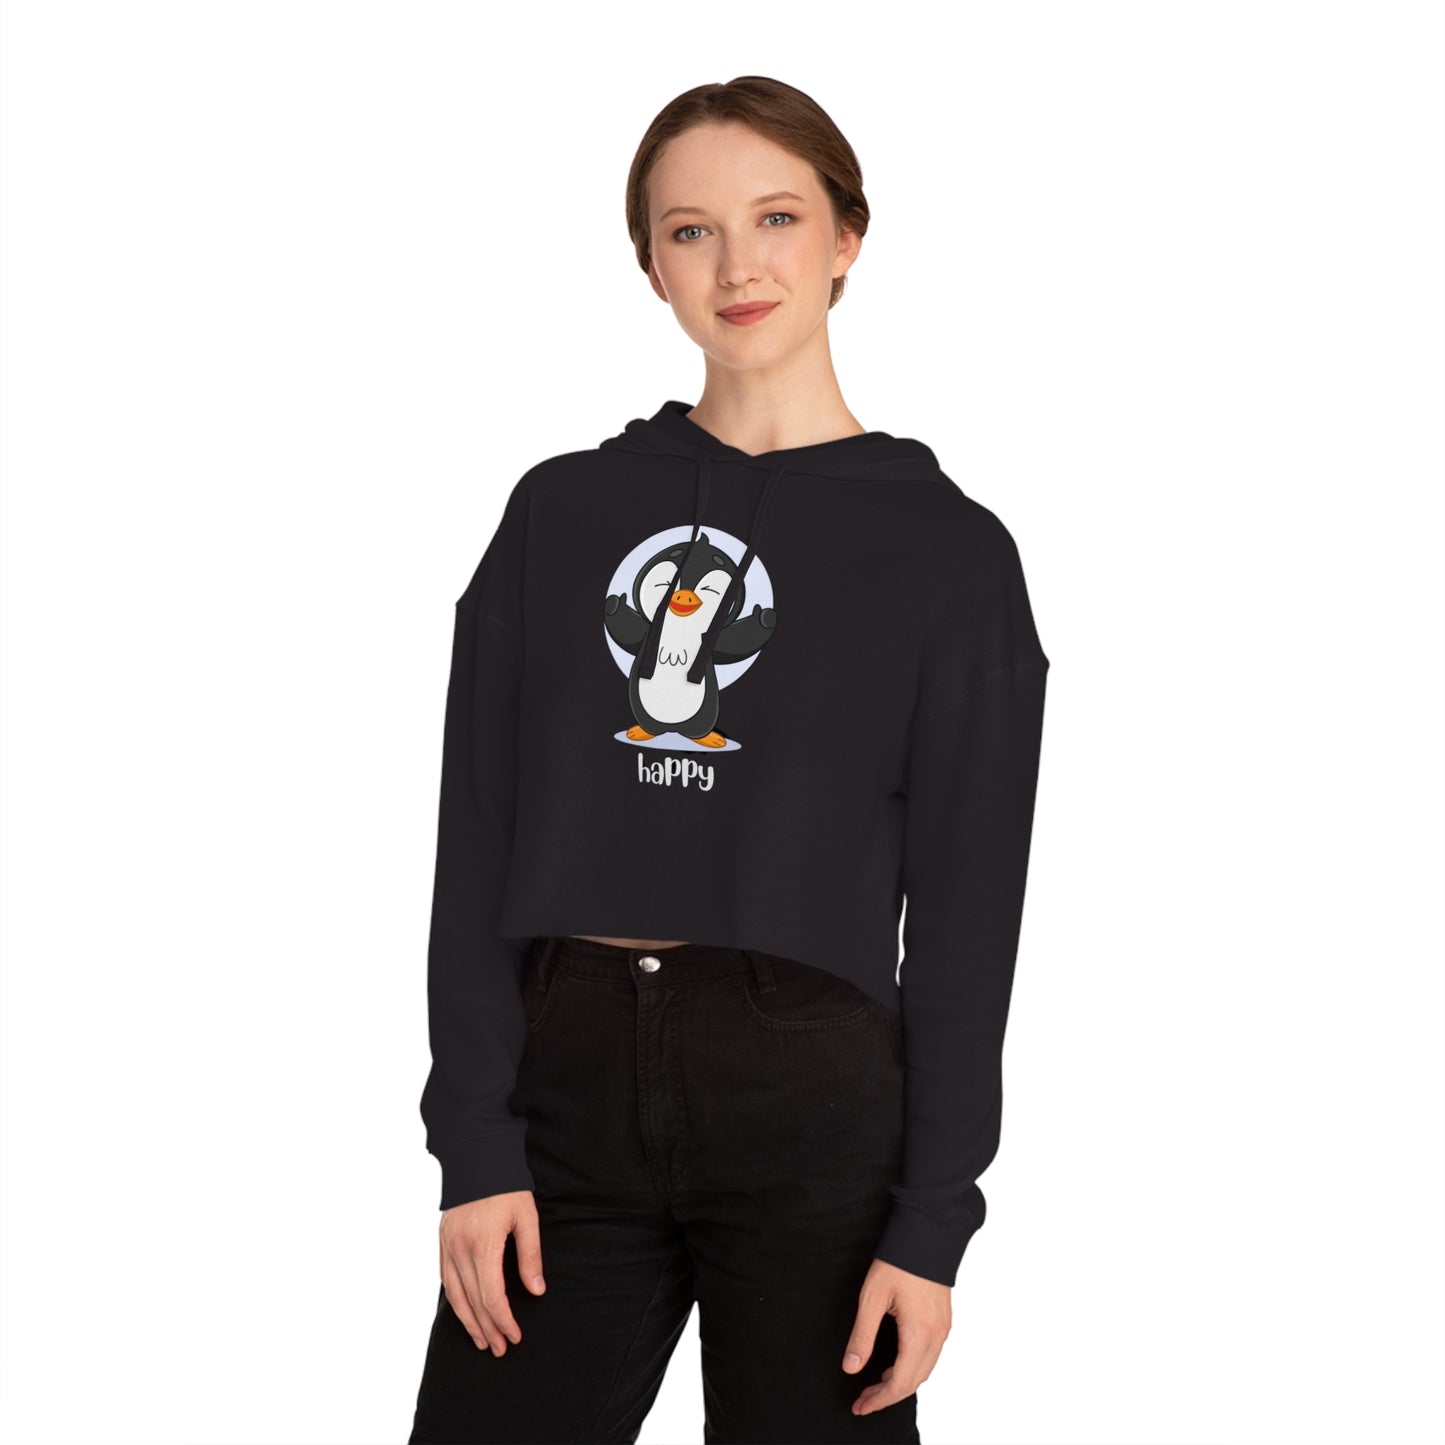 Happy penguin on this simple and stylish Women’s Cropped Hooded Sweatshirt for your enjoyment.